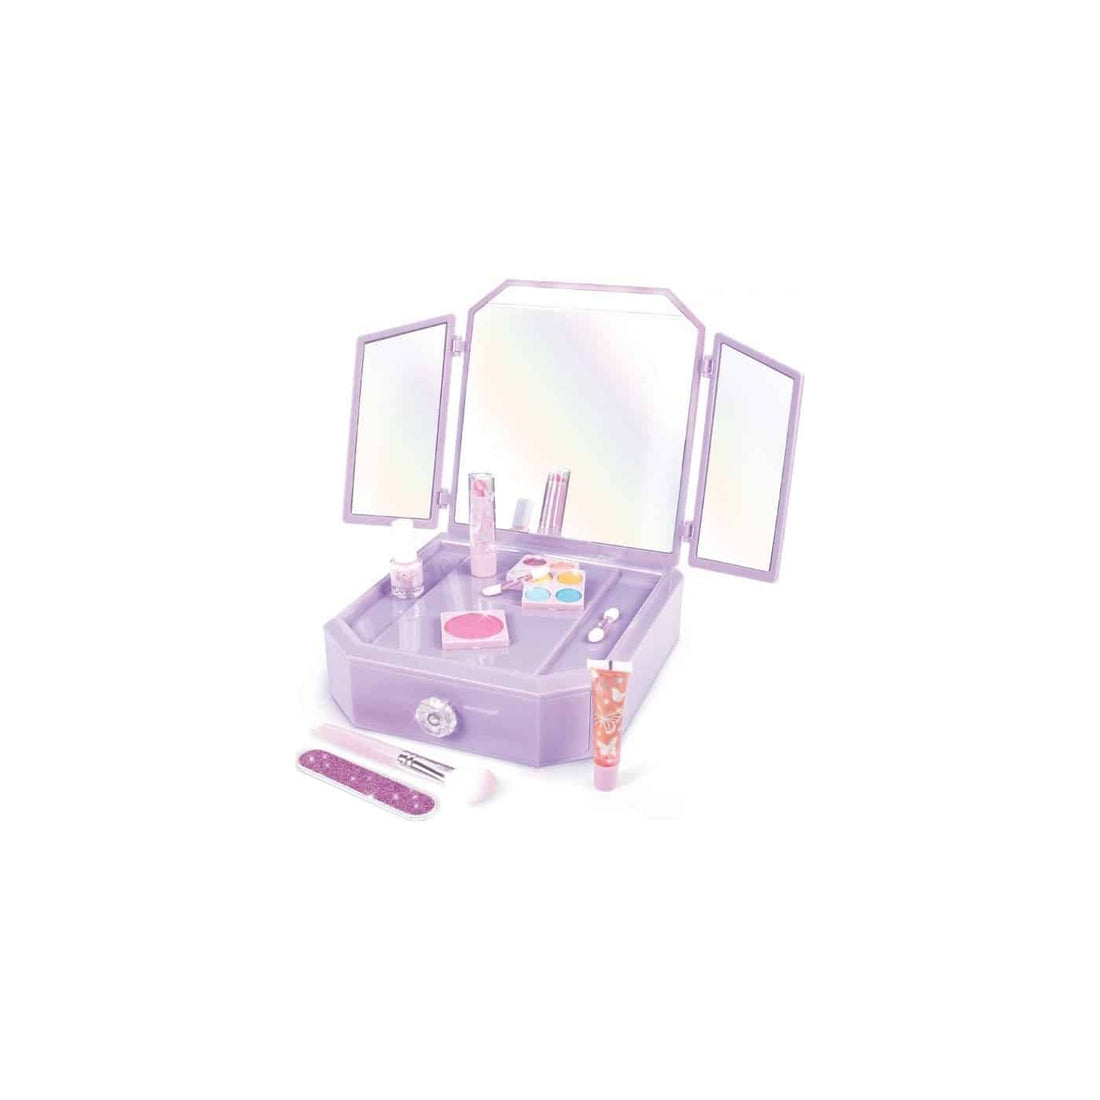 Make It Real! Beauty Deluxe Light Up Mirrored Vanity And Cosmetic Set